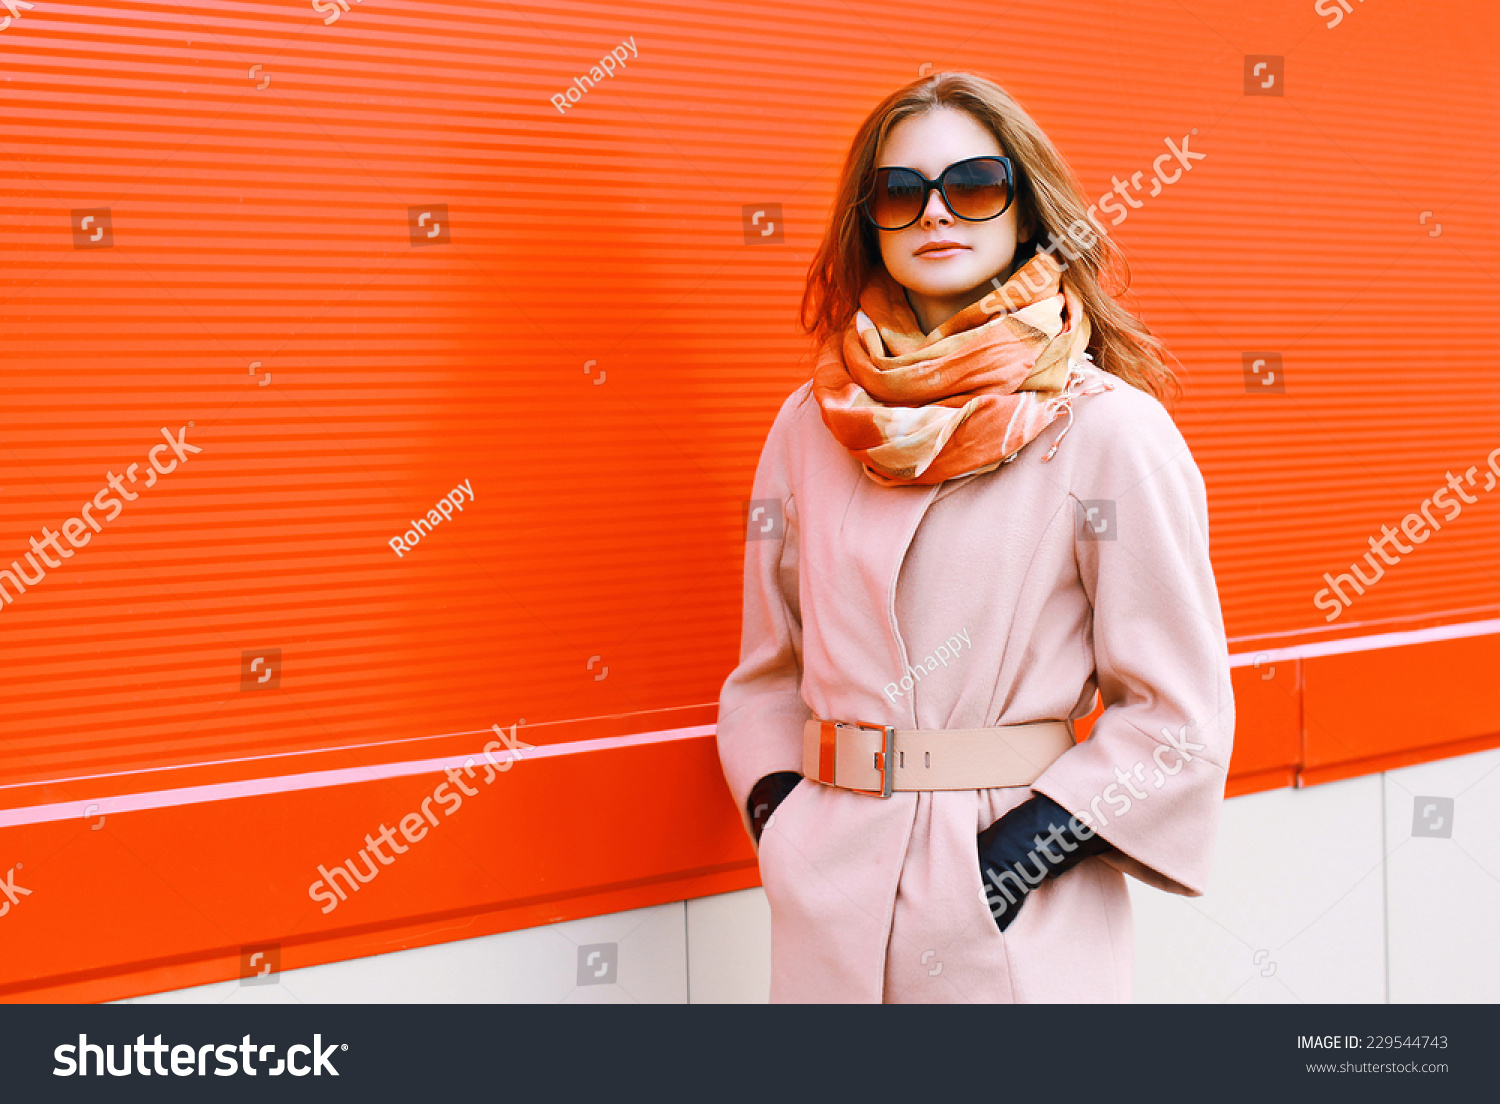 Beauty, fashion, shopping and people concept - pretty stylish woman in coat and sunglasses posing outdoors against colorful wall in the city #229544743